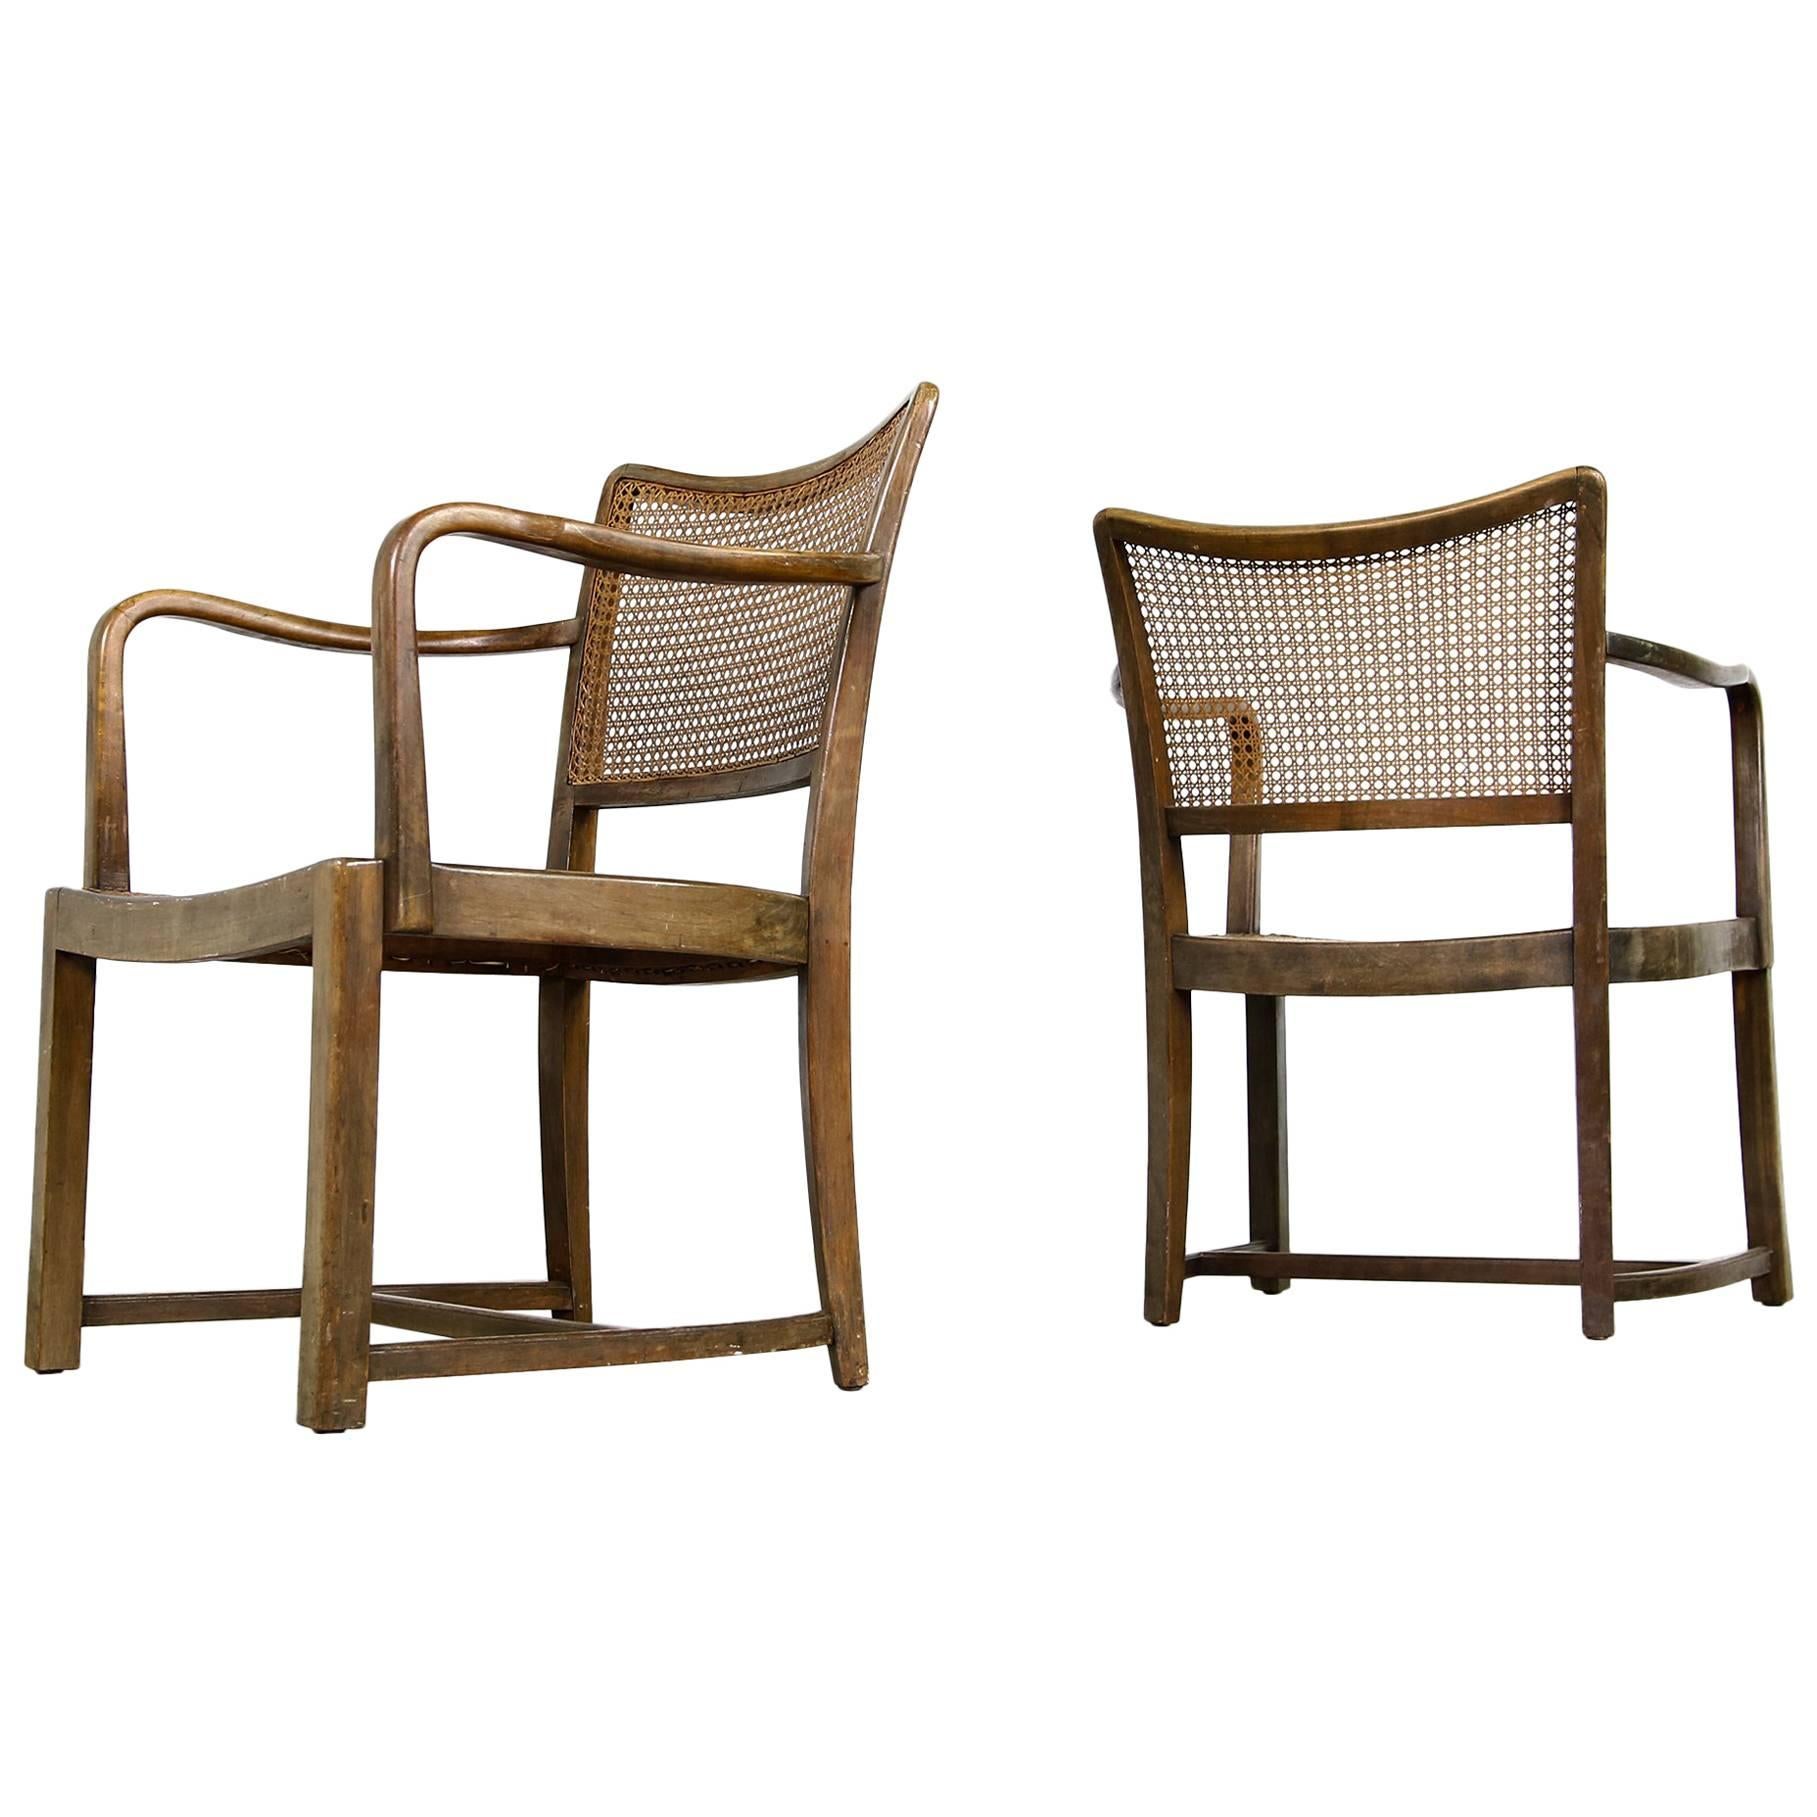 Pair Of Vintage Midcentury Bentwood And Cane Chairs S Post War Modern For Sale At StDibs